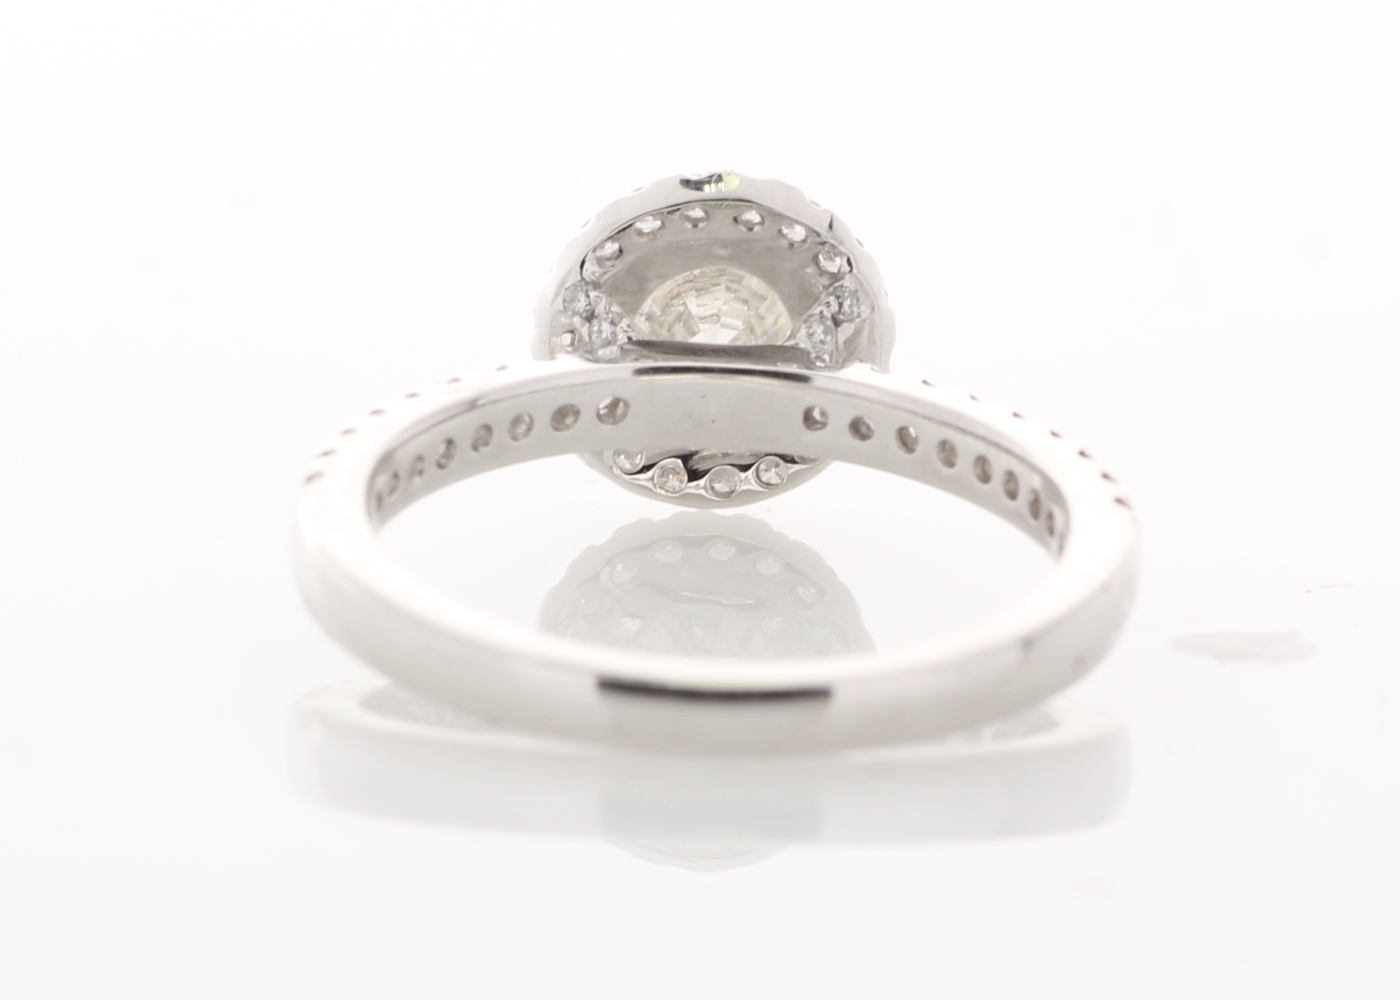 18ct White Gold Single Stone With Halo Setting Ring (1.01) 1.37 Carats - Valued By IDI £32,370. - Image 3 of 5